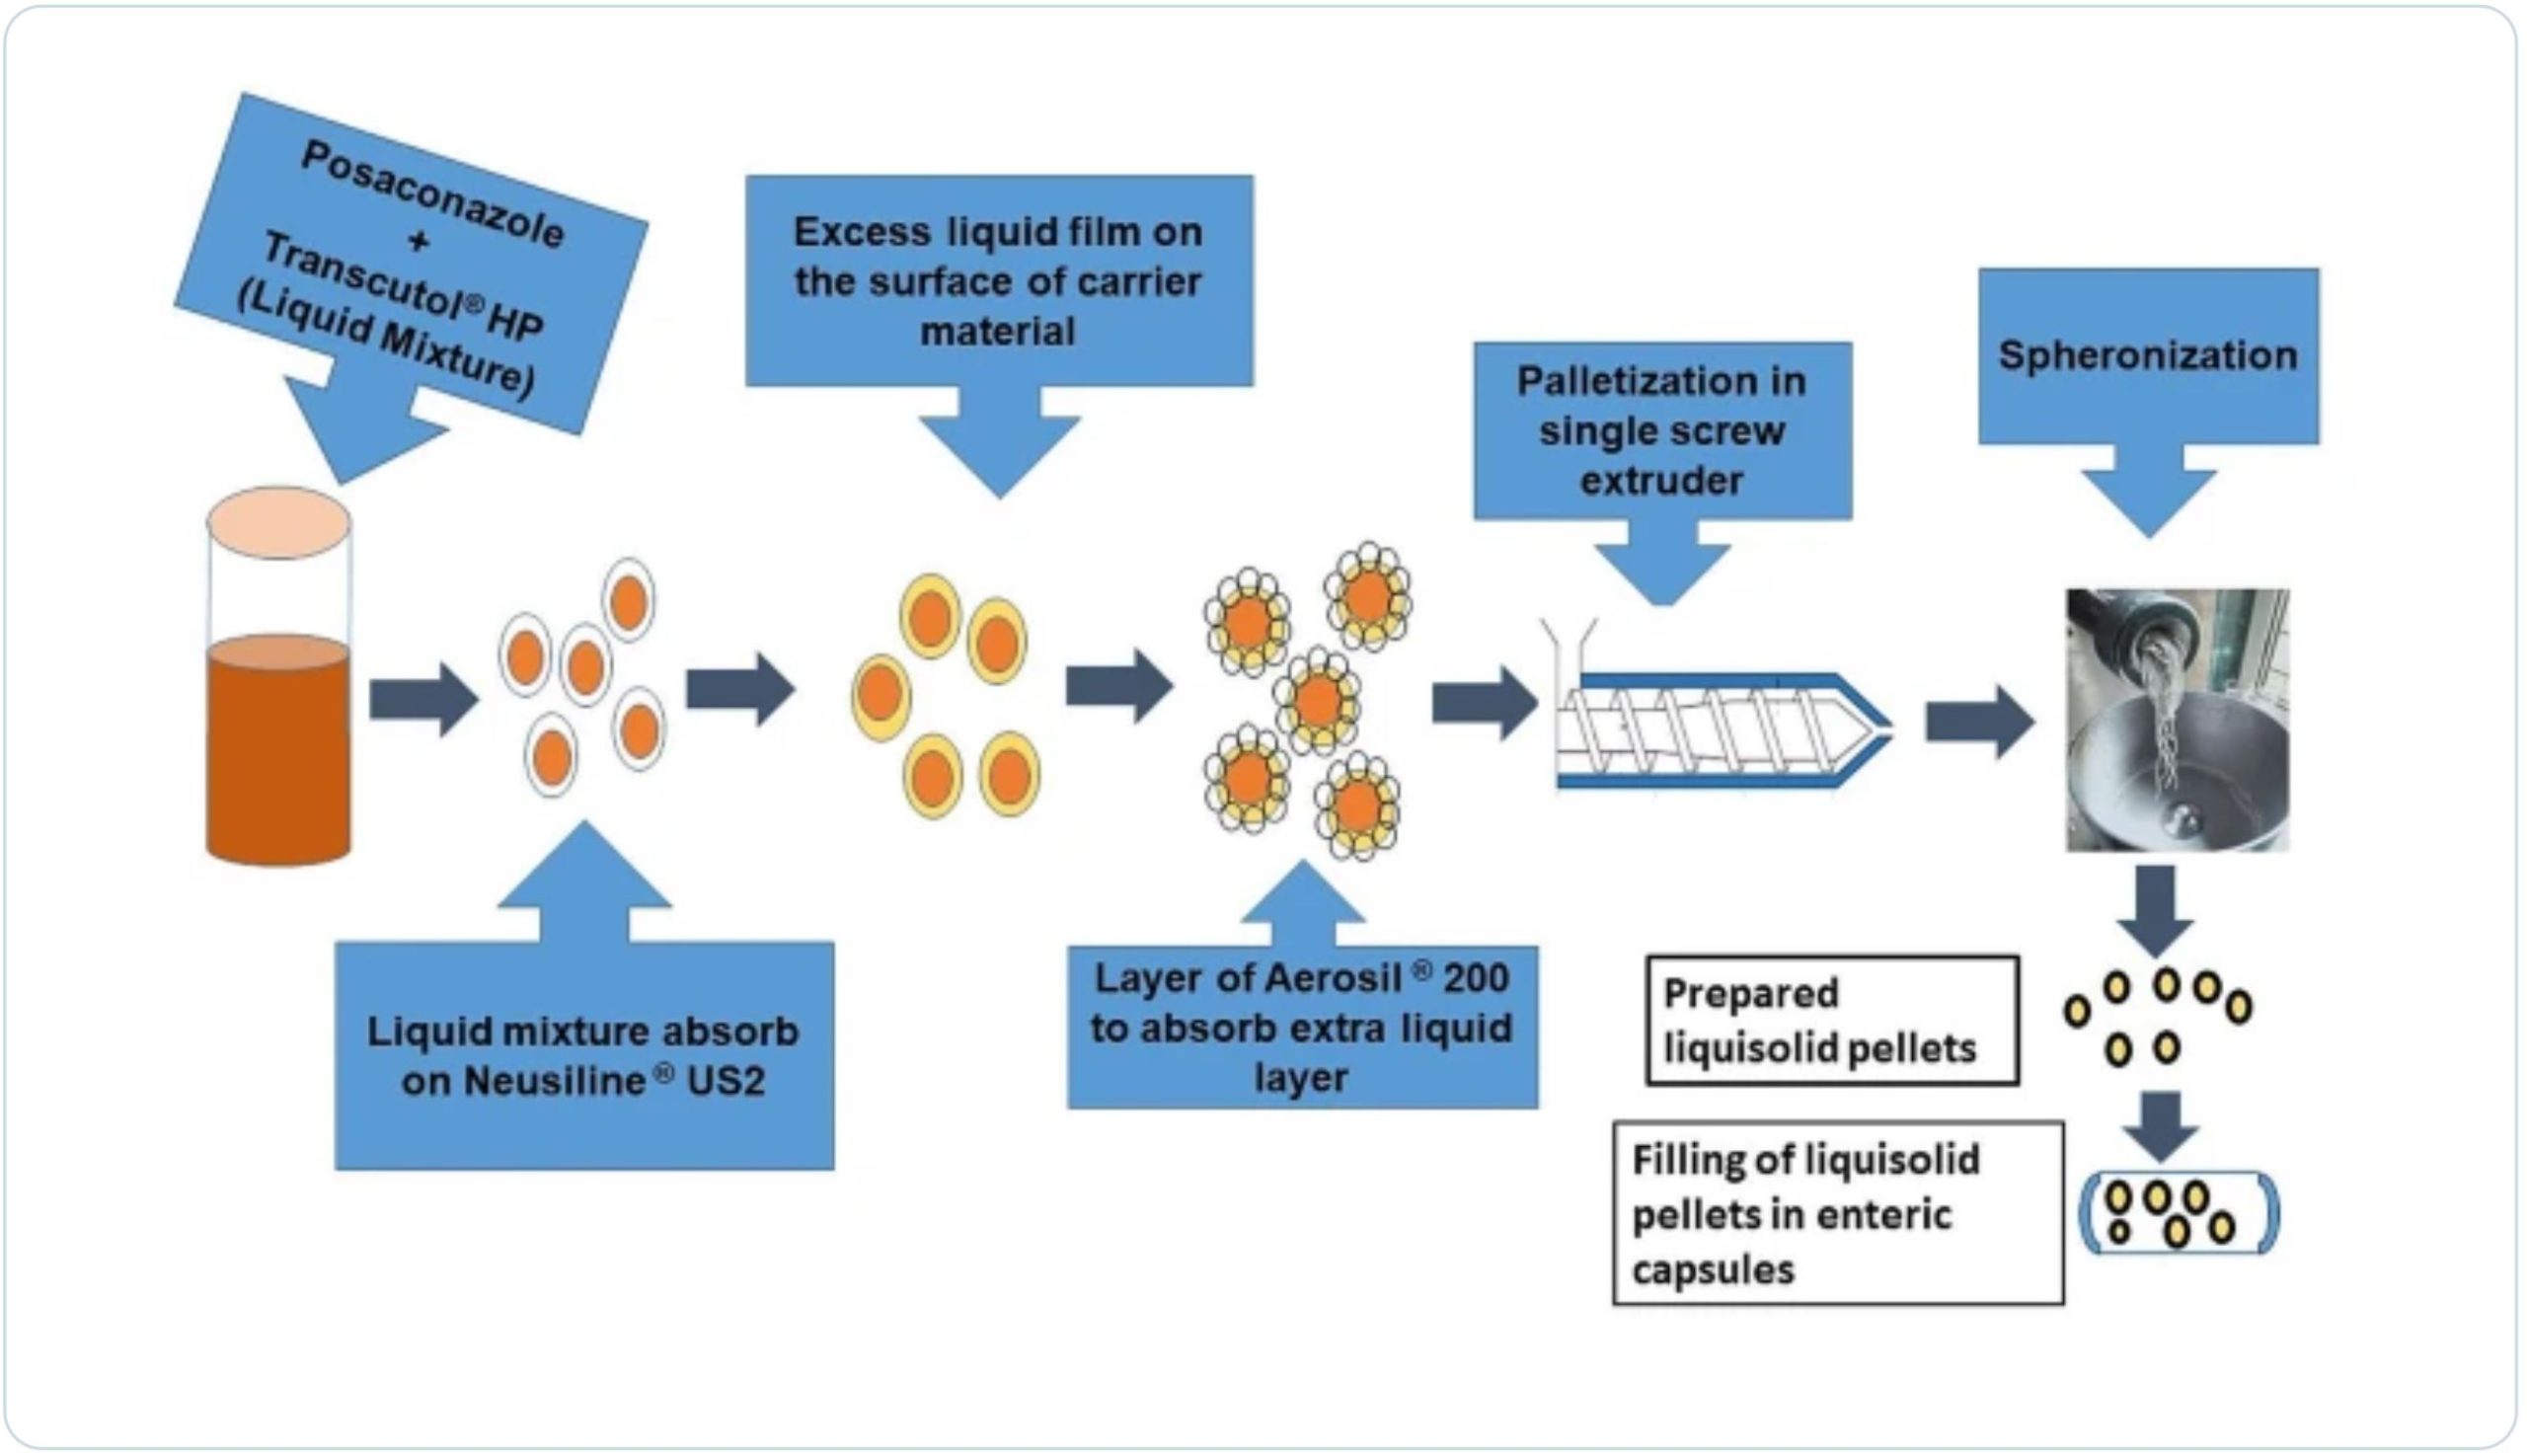 Application of Liquisolid Pellets Technology for Improving Dissolution of Posaconazole